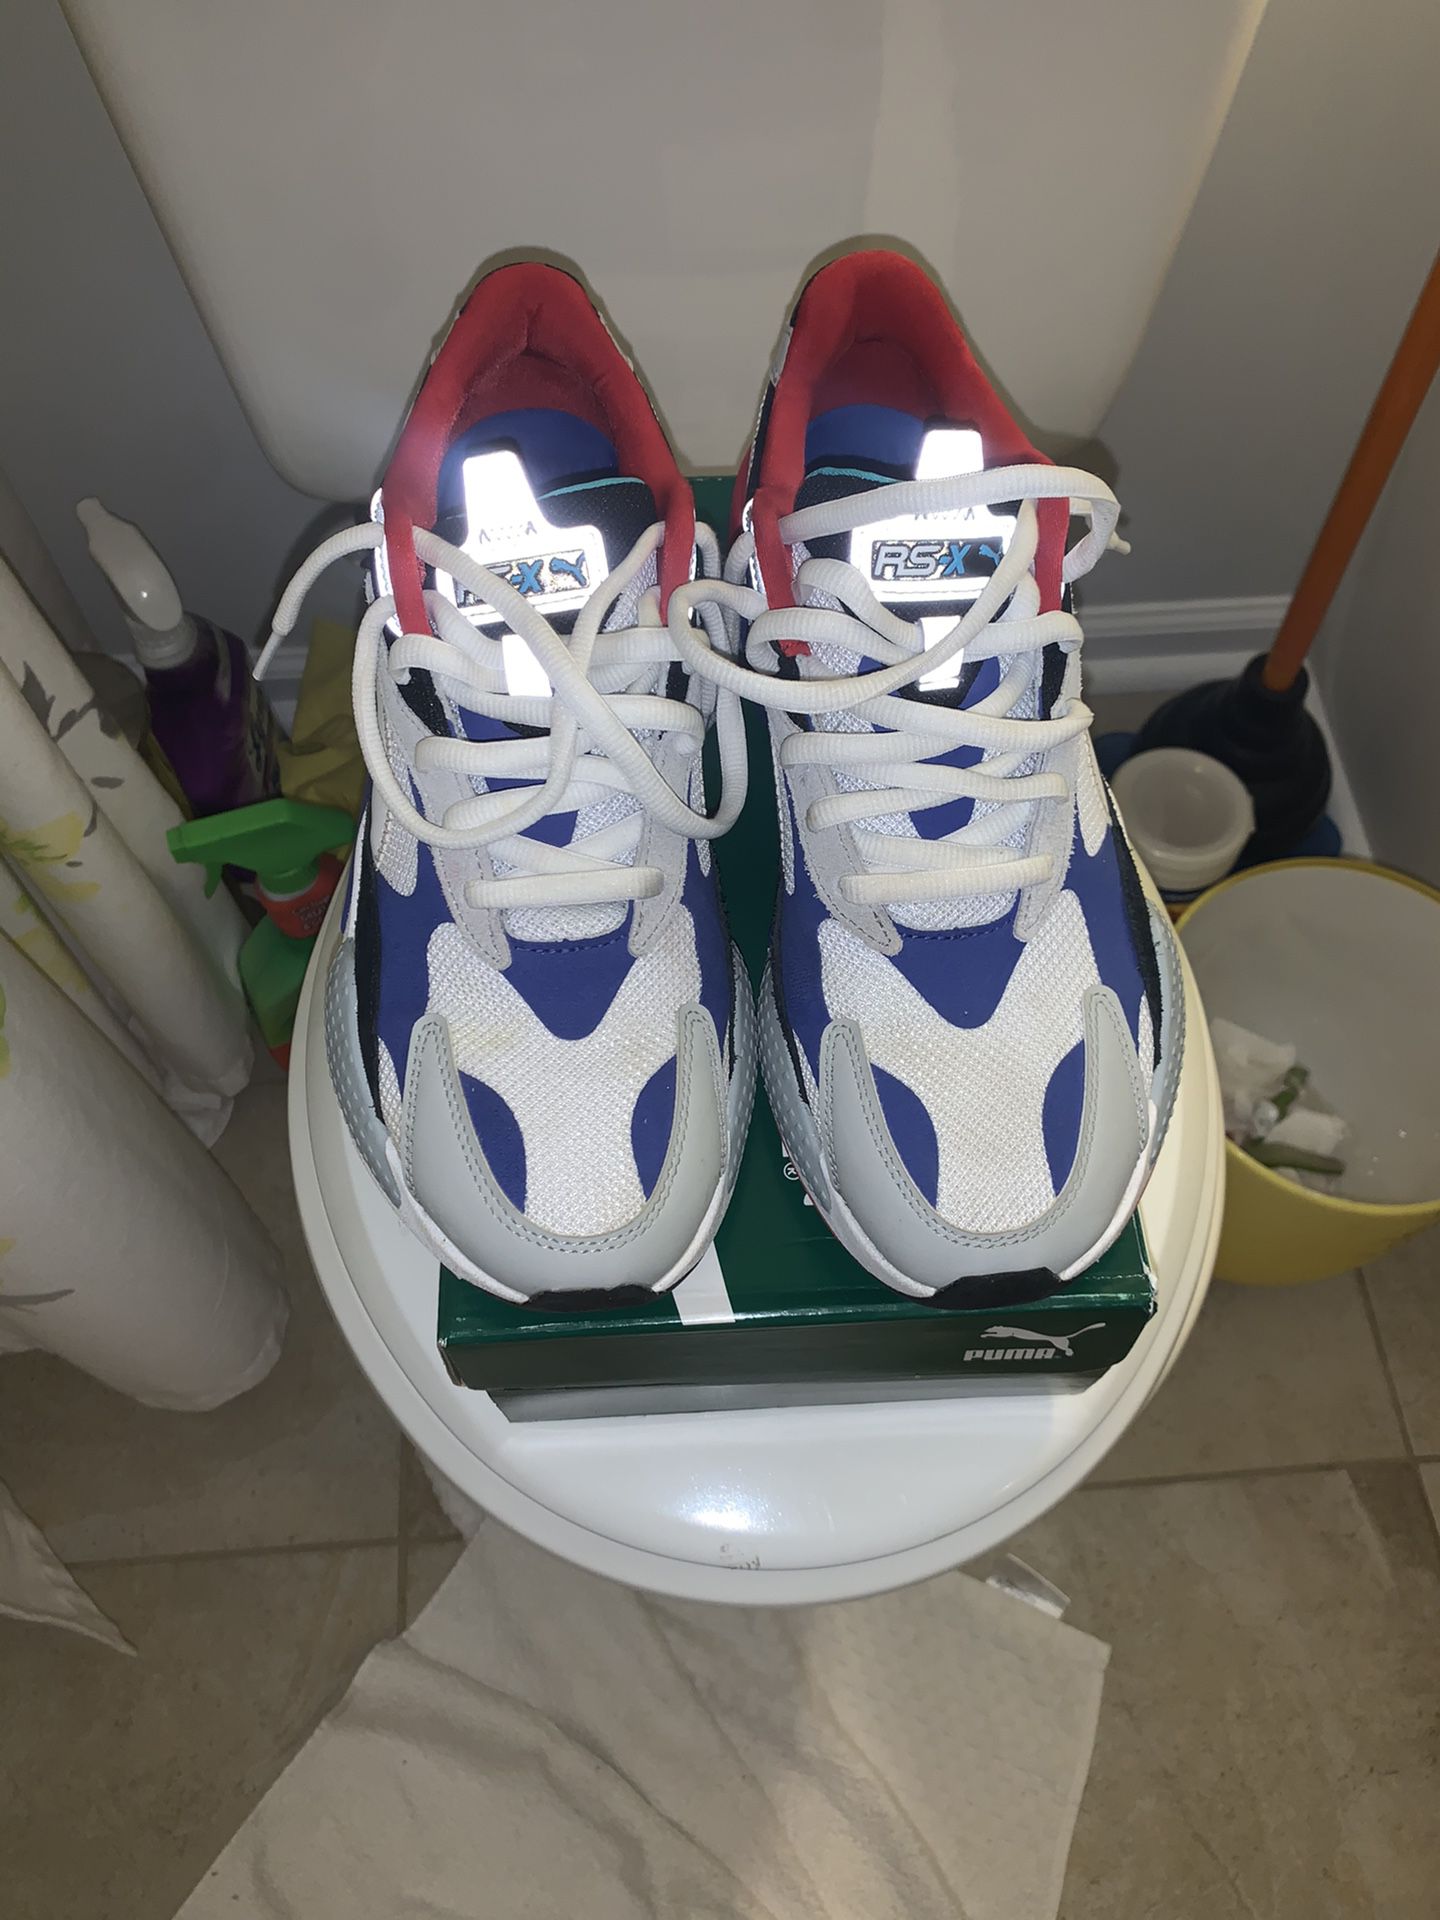 Puma RS-X size 9.5 US 9.5/10 condition